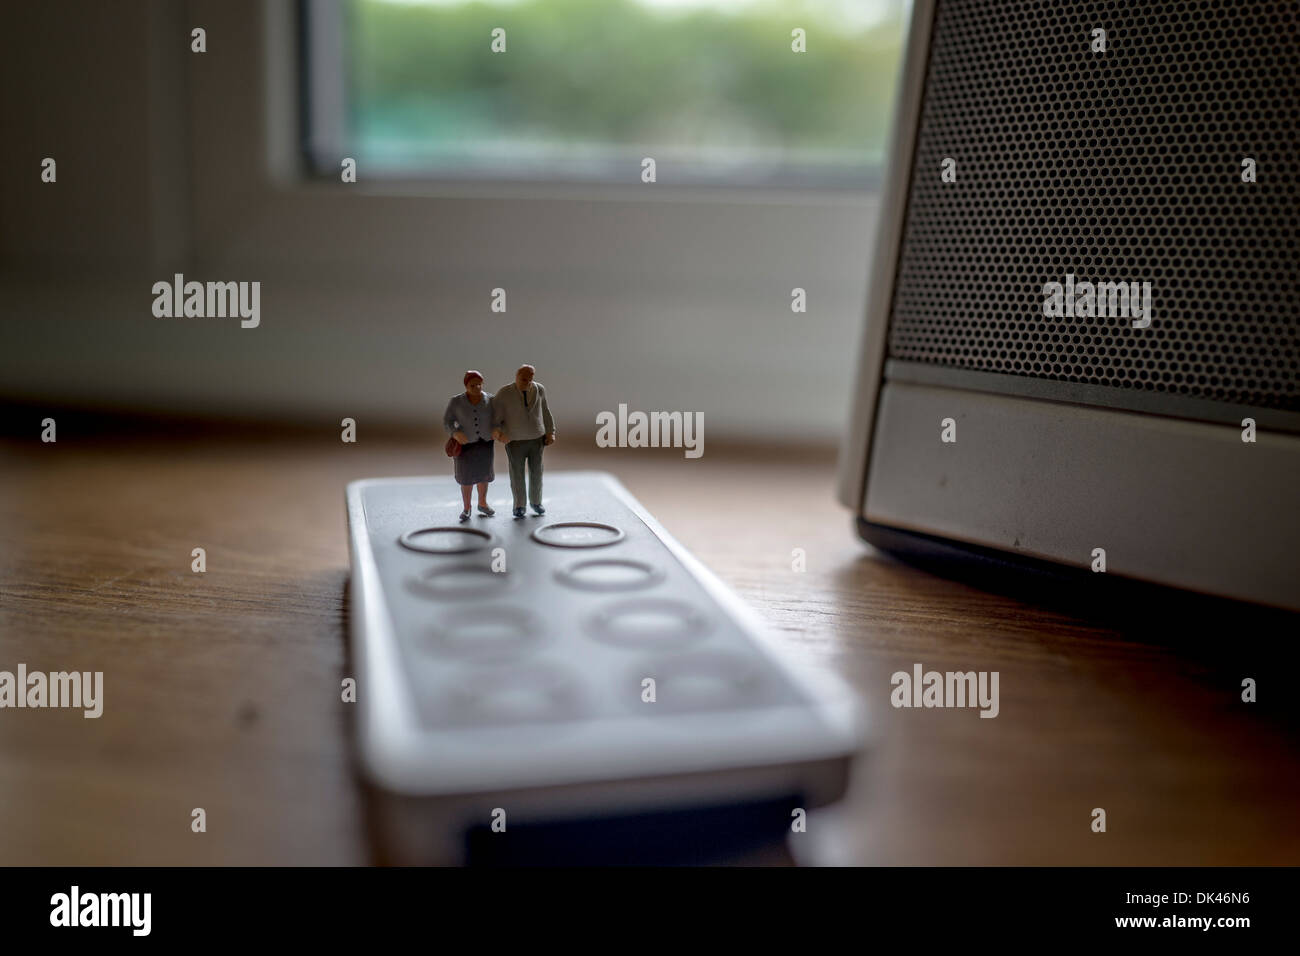 Elderly couple figurines standing on a remote control Stock Photo